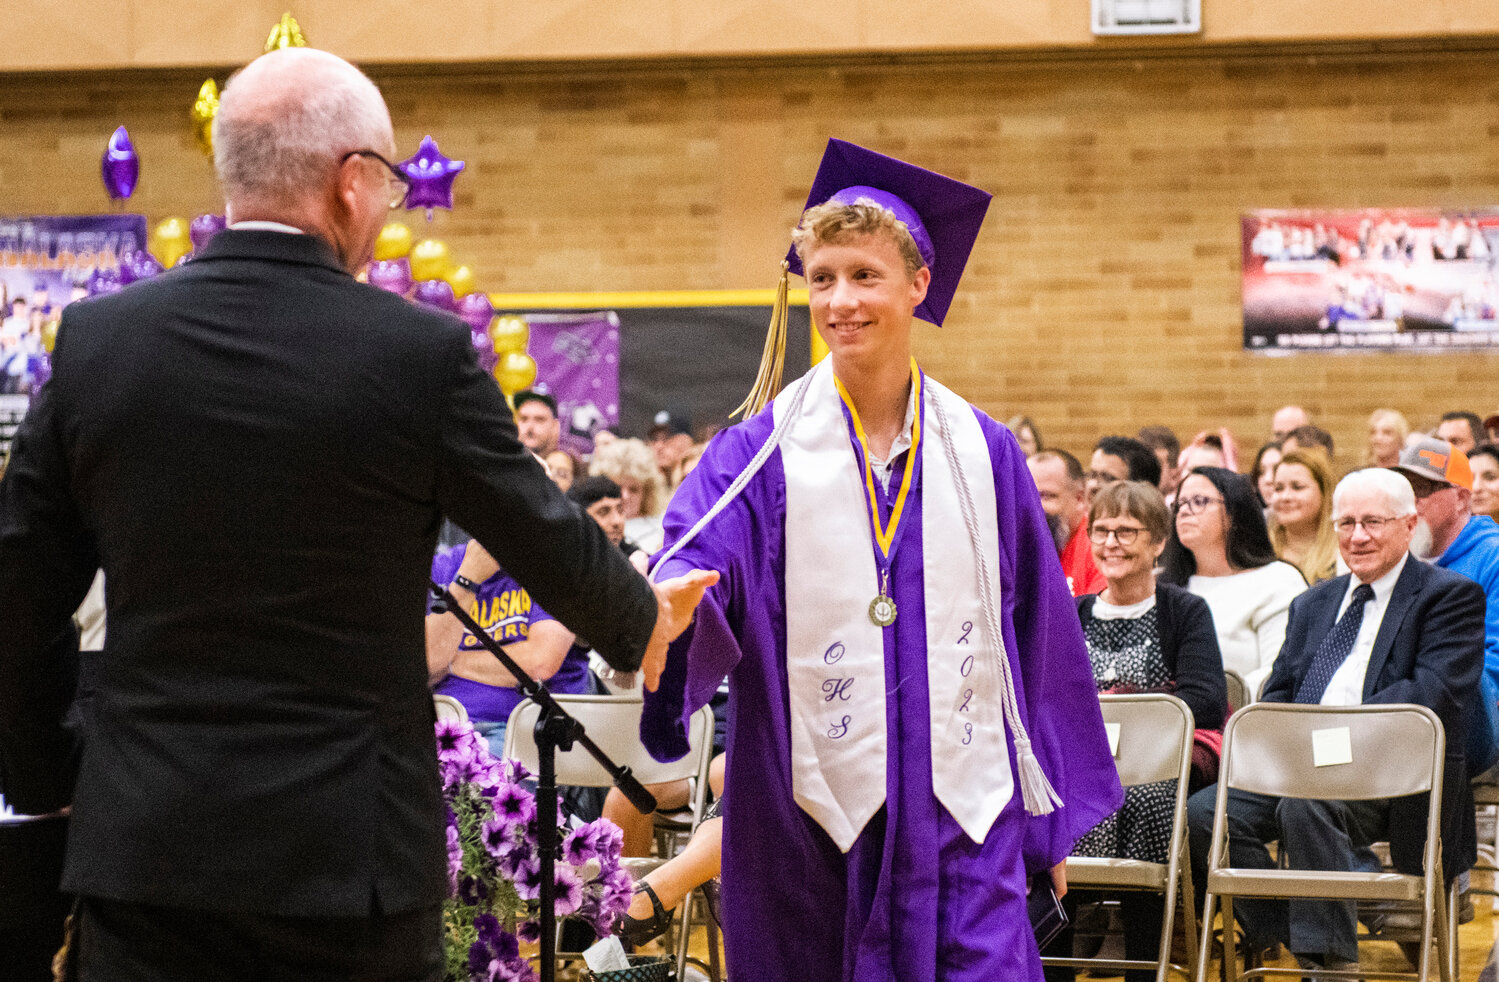 Onalaska High School graduating senior Benjamin Russon shakes hands with the principal after being awarded his diploma, honors for his GPA and a staff award noting him as the class’ most athletic boy on Friday.